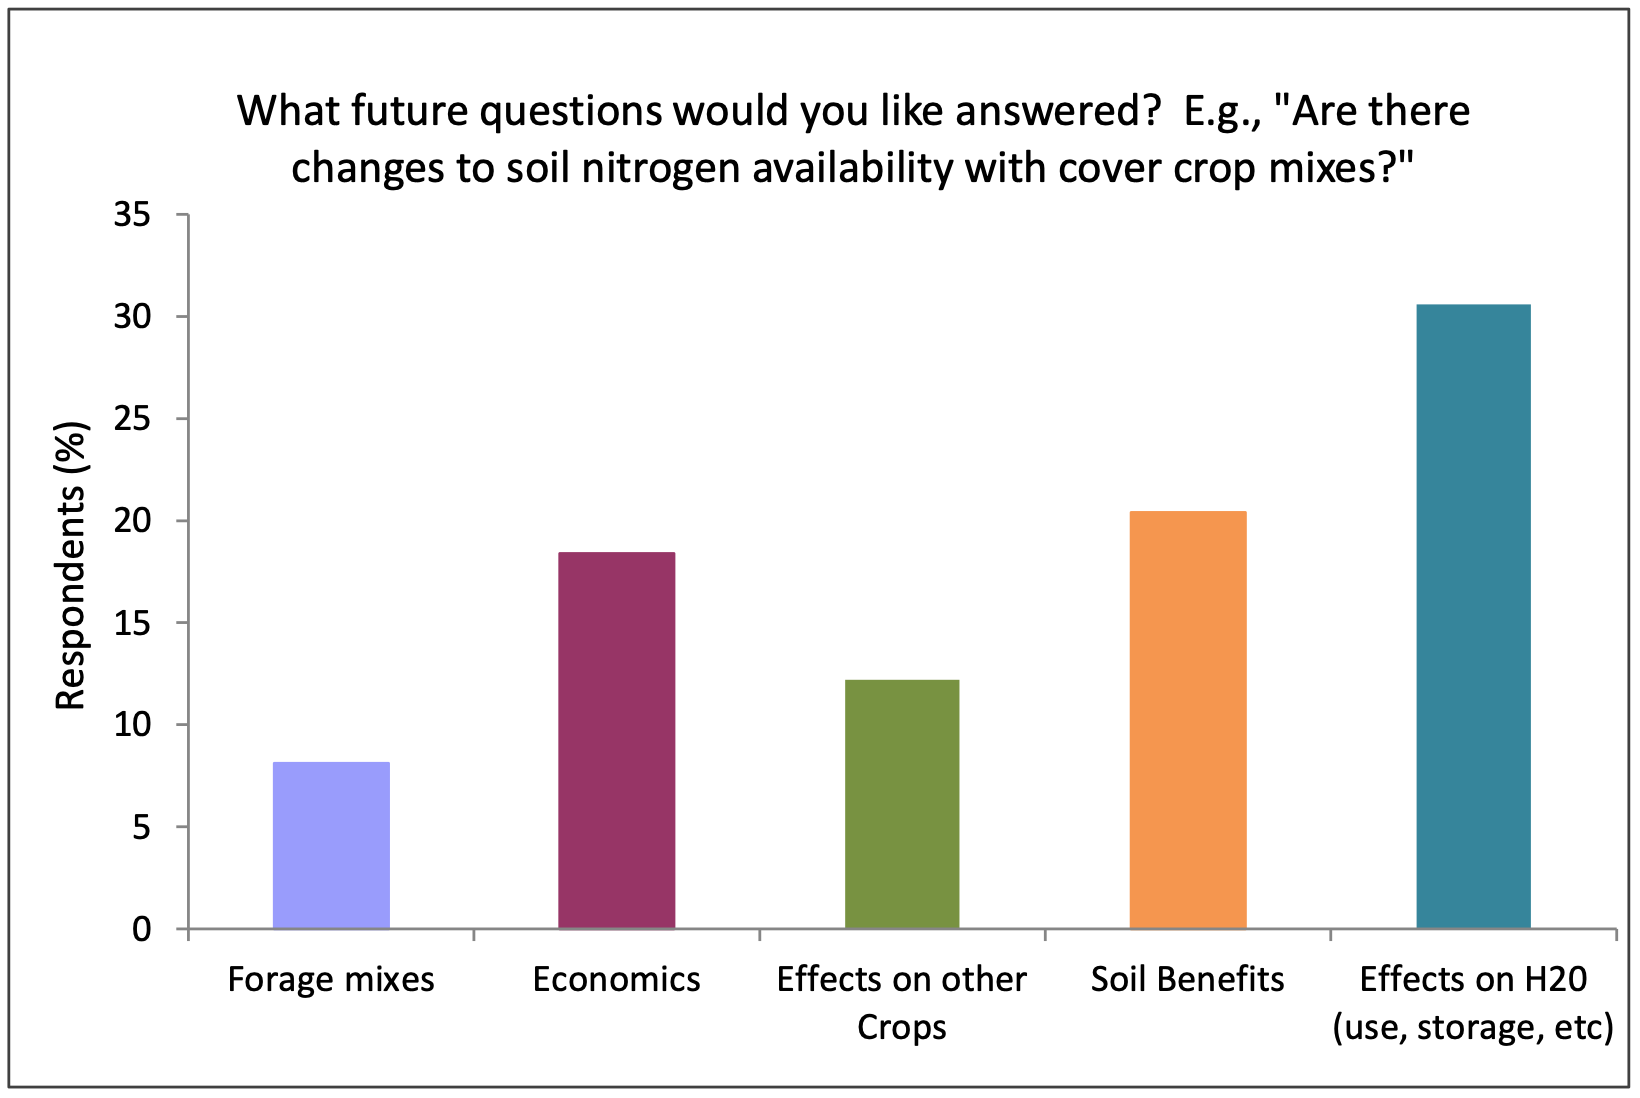 The whole respondent list was asked to answer this short answer question. “Economics” included cost/benefit and insurance. Other question topics listed by 5% or fewer of the respondents include program incentives, infrastructure, pest management, and basic knowledge. N=49